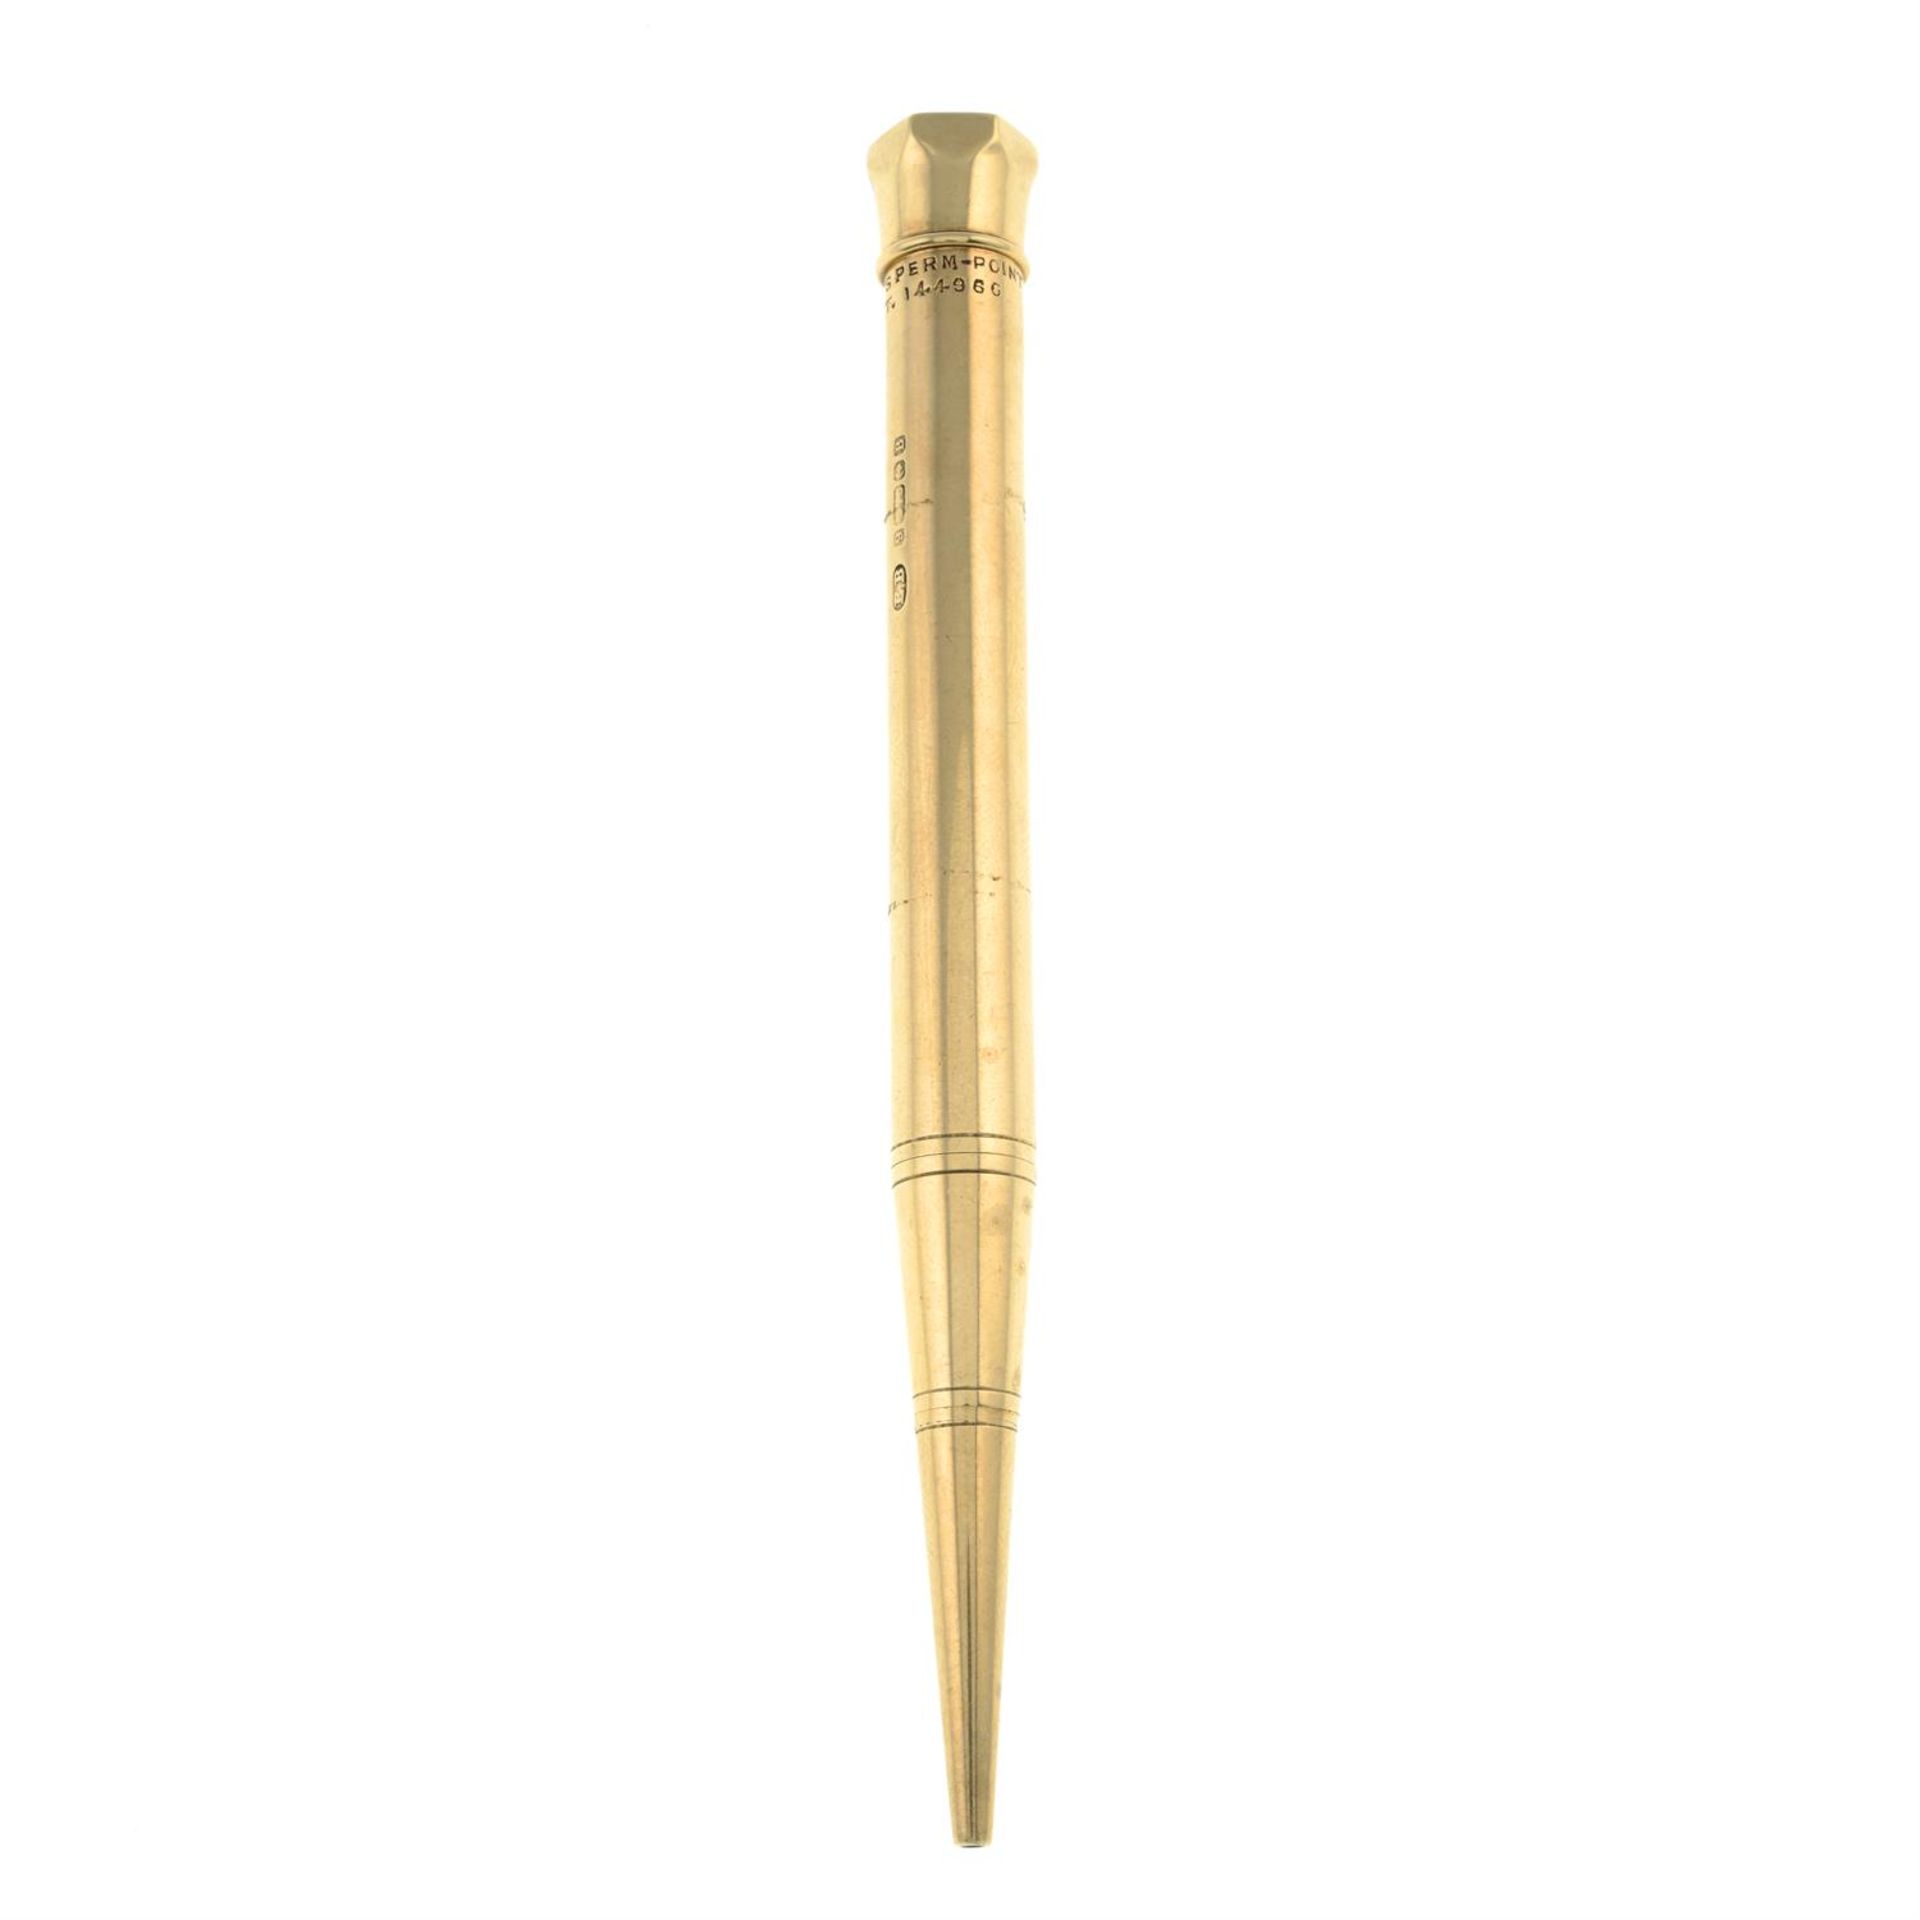 Early 20th century 9ct gold Baker's ‘Perm-Point’ pensil, Asprey